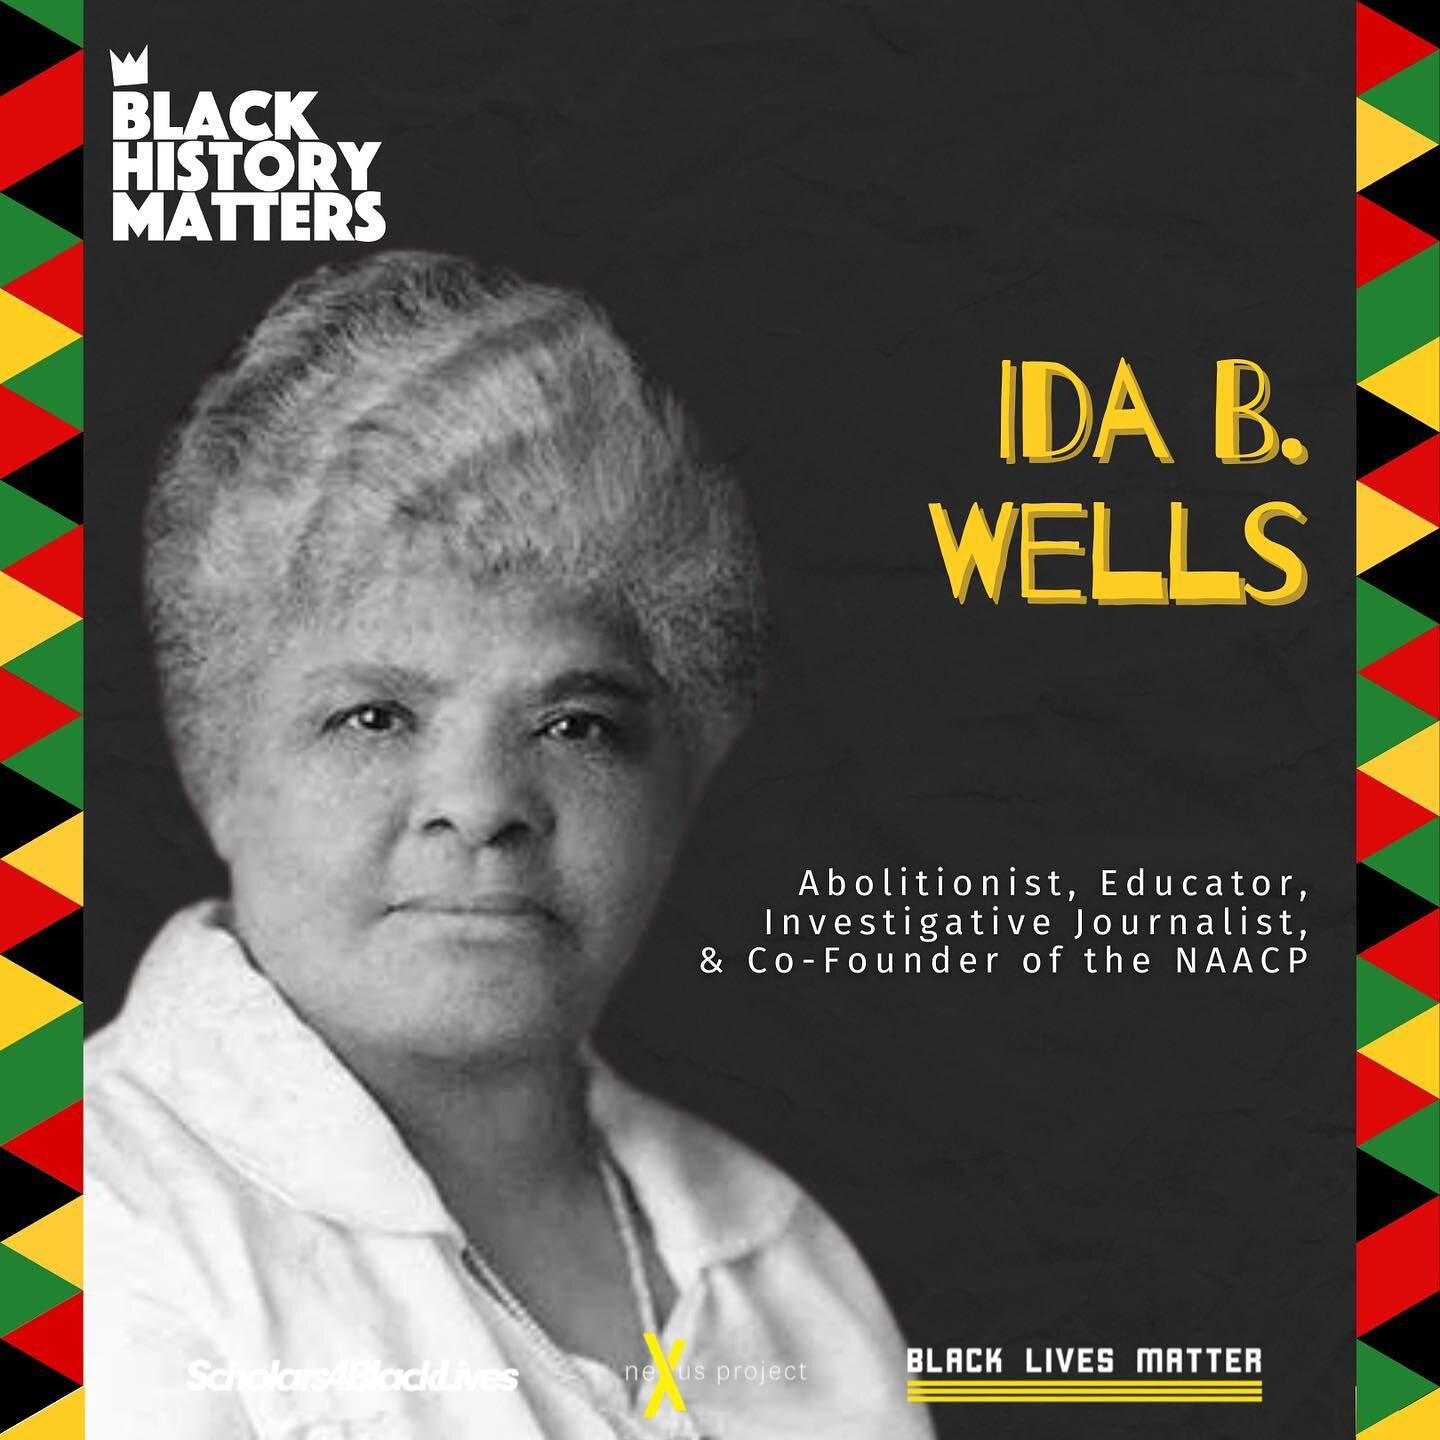 Ida Bell Wells-Barnett was born into slavery in Holly Springs, Mississippi in 1862. Her father, James Madison Wells, was a successful carpenter who became heavily involved in efforts to elect the first Black government officials in the South during R